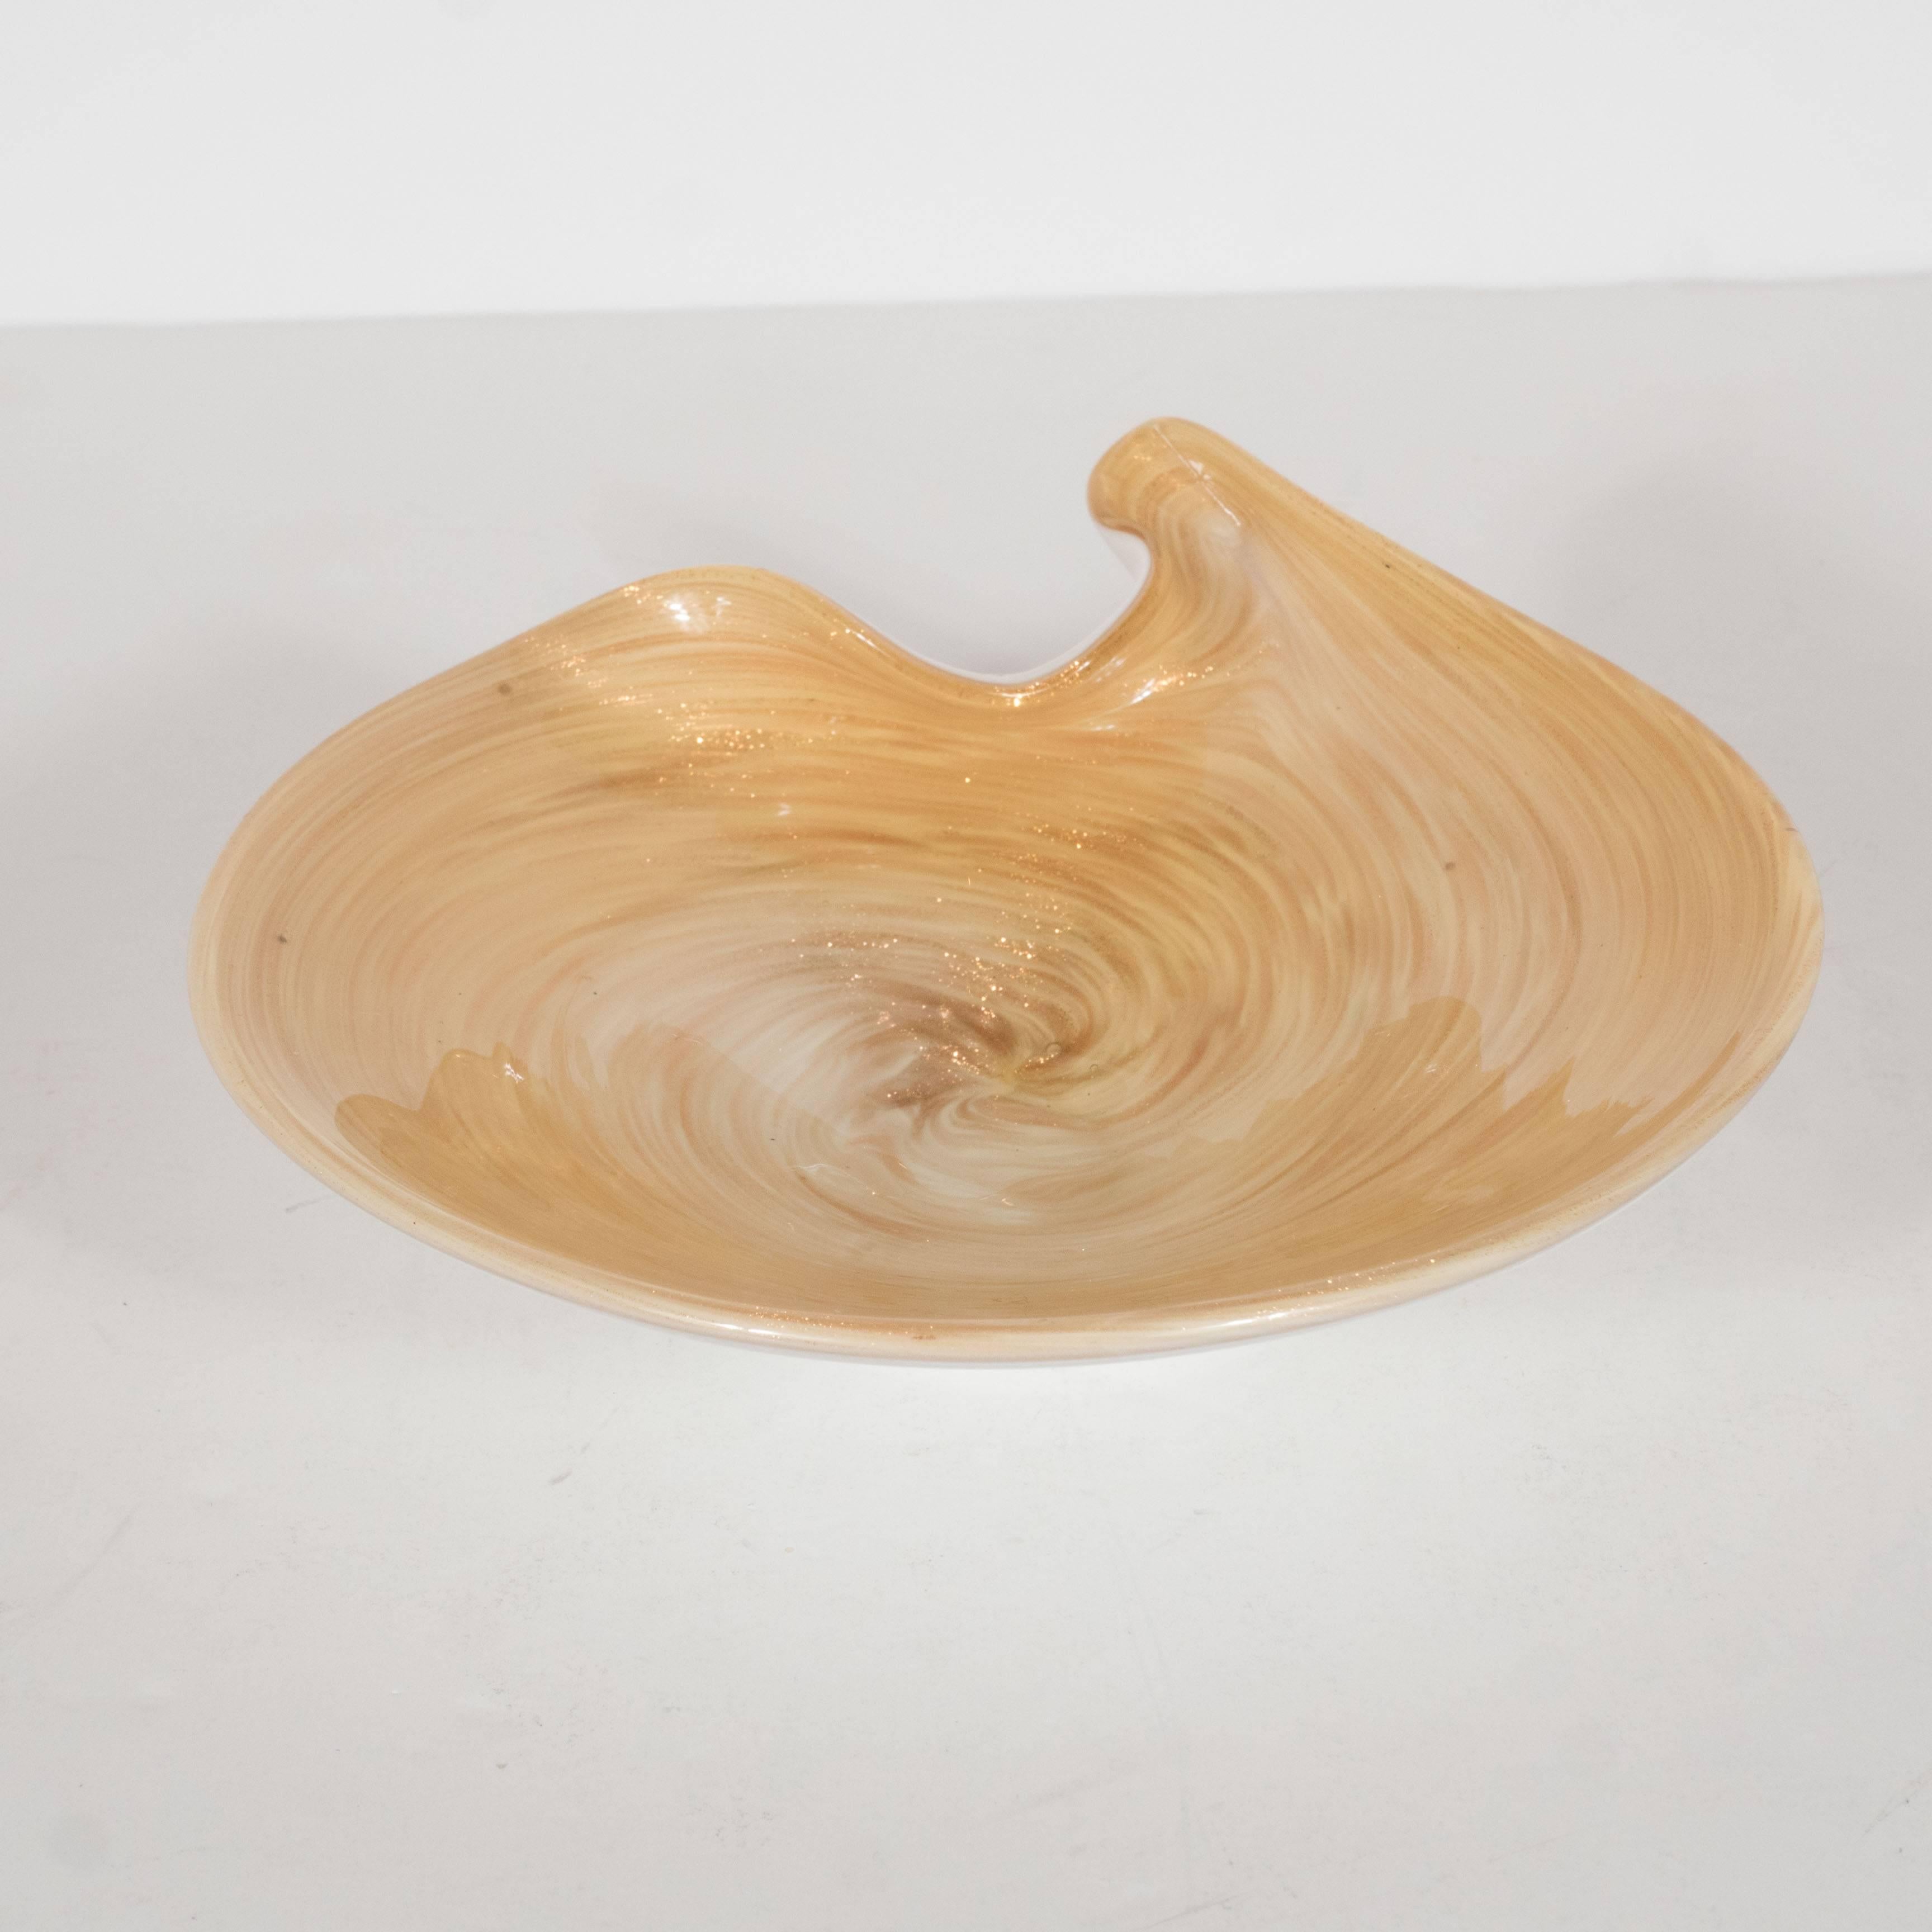 A Mid-Century Modernist handblown Murano glass dish or bowl in the form of a painter's color palette. This piece features a swirl of rich blends of 24-karat gold leaf in dust-form and cream, giving the piece warmth and movement. Its outside is